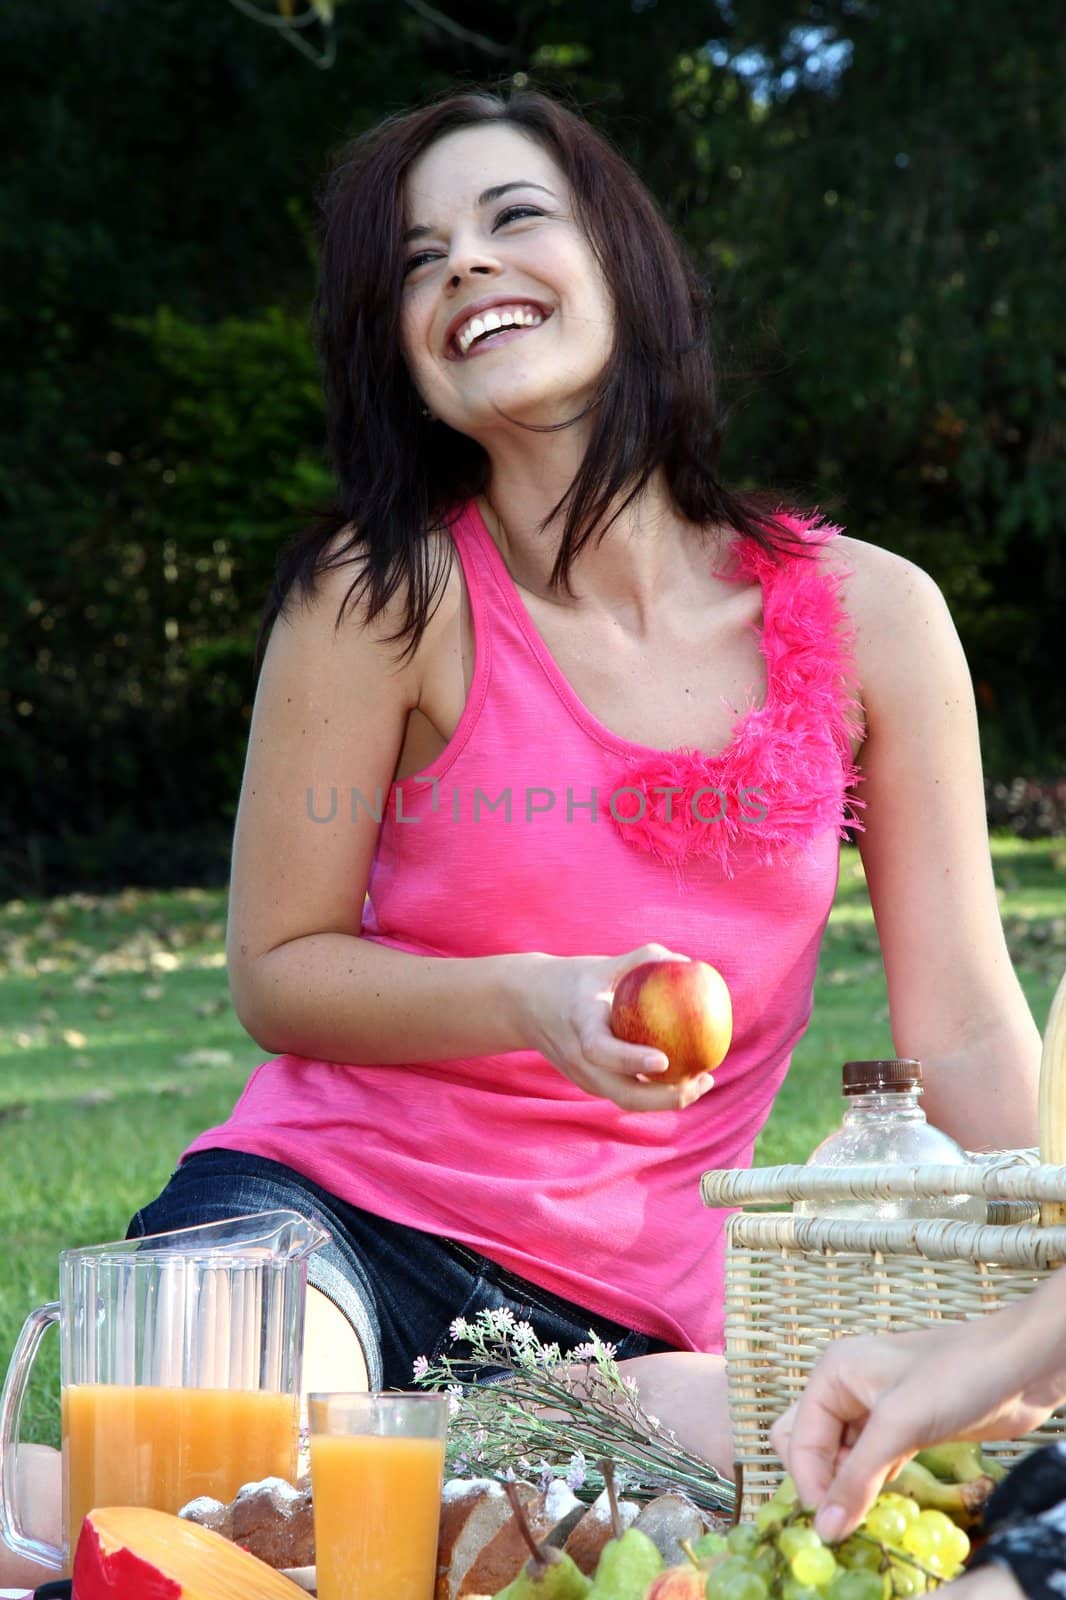 Gorgeous smiling brunette woman eating an apple at an outdoor picnic